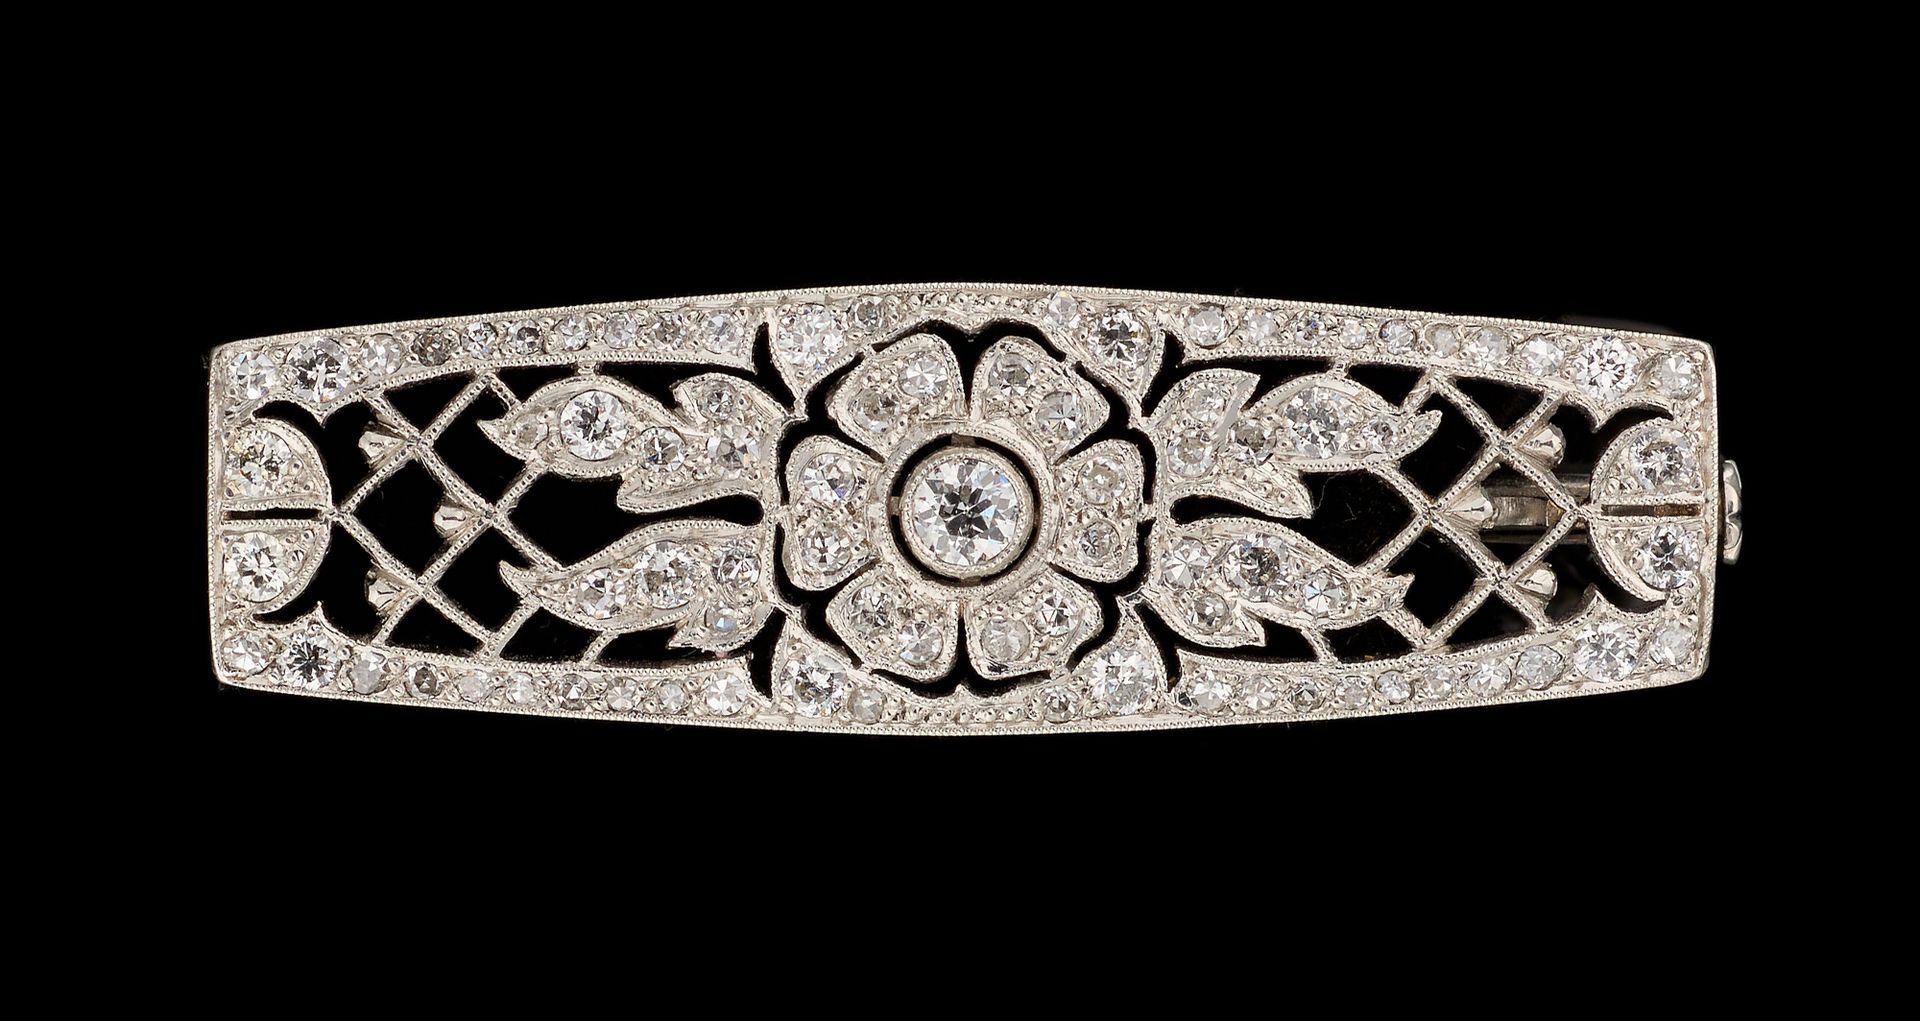 Circa 1900. Jewel: Brooch in platinum with old cut diamonds for +/- 1,40 carat.
&hellip;